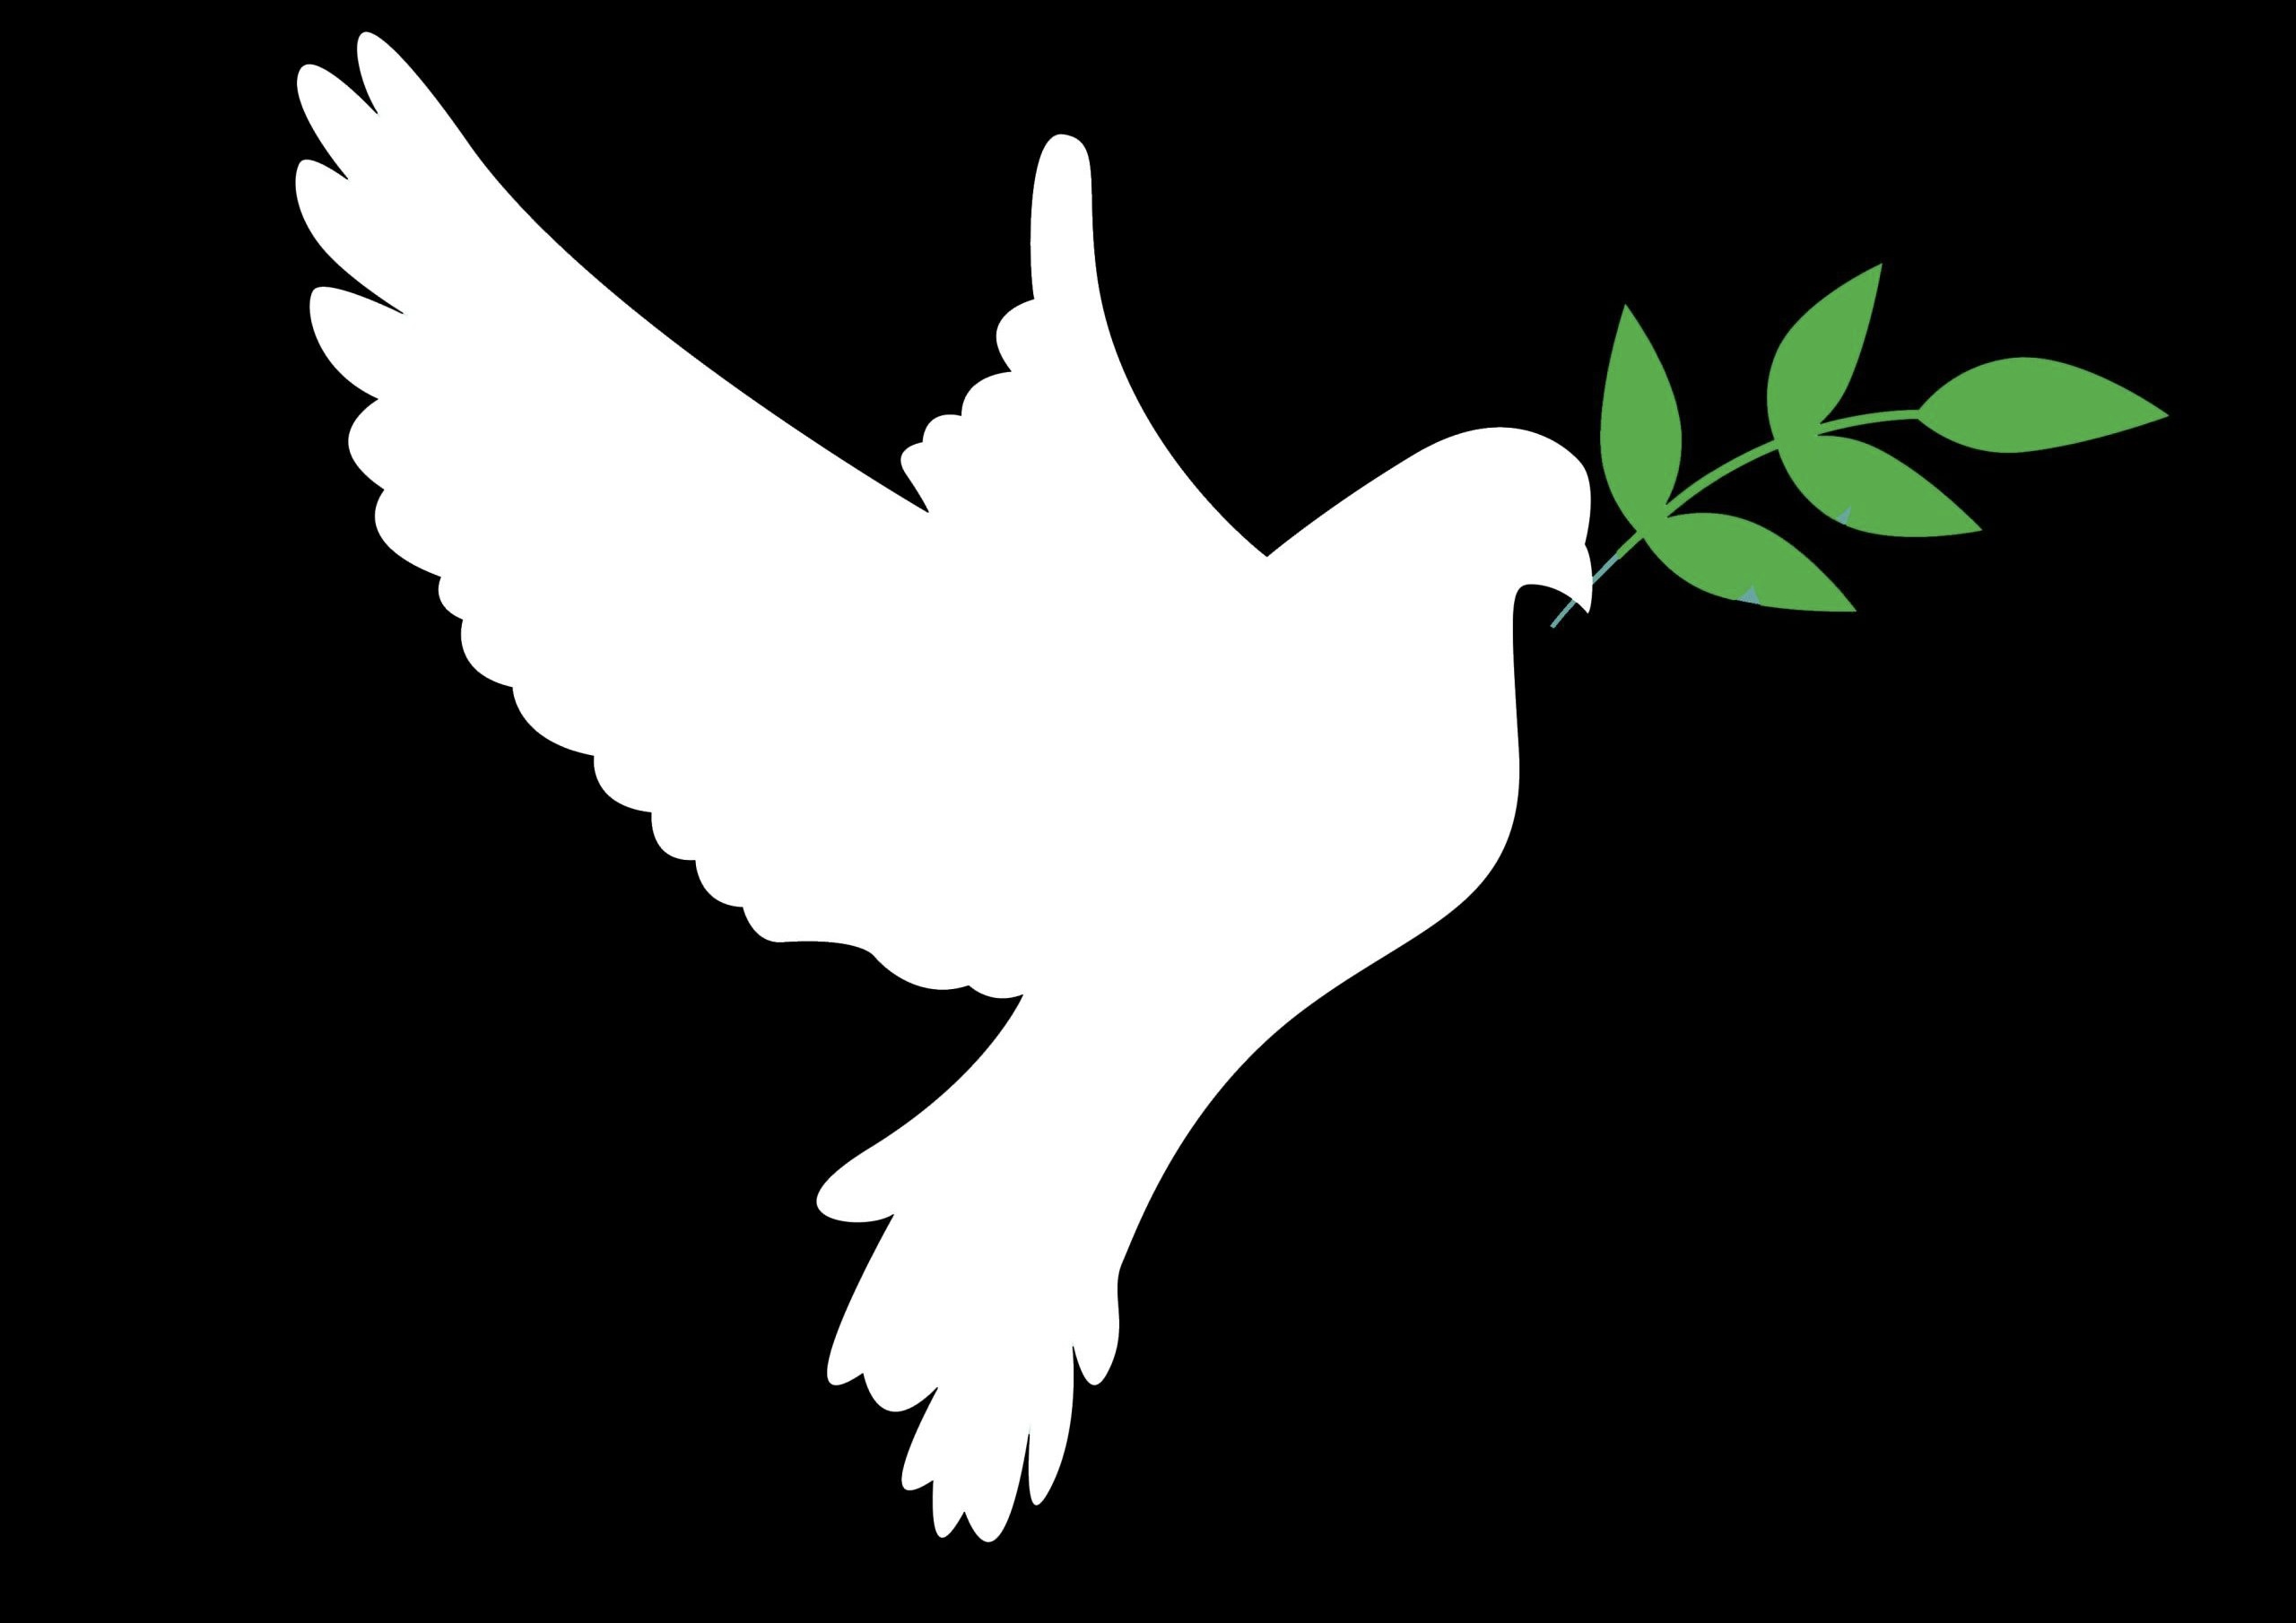 The Dove of Peace